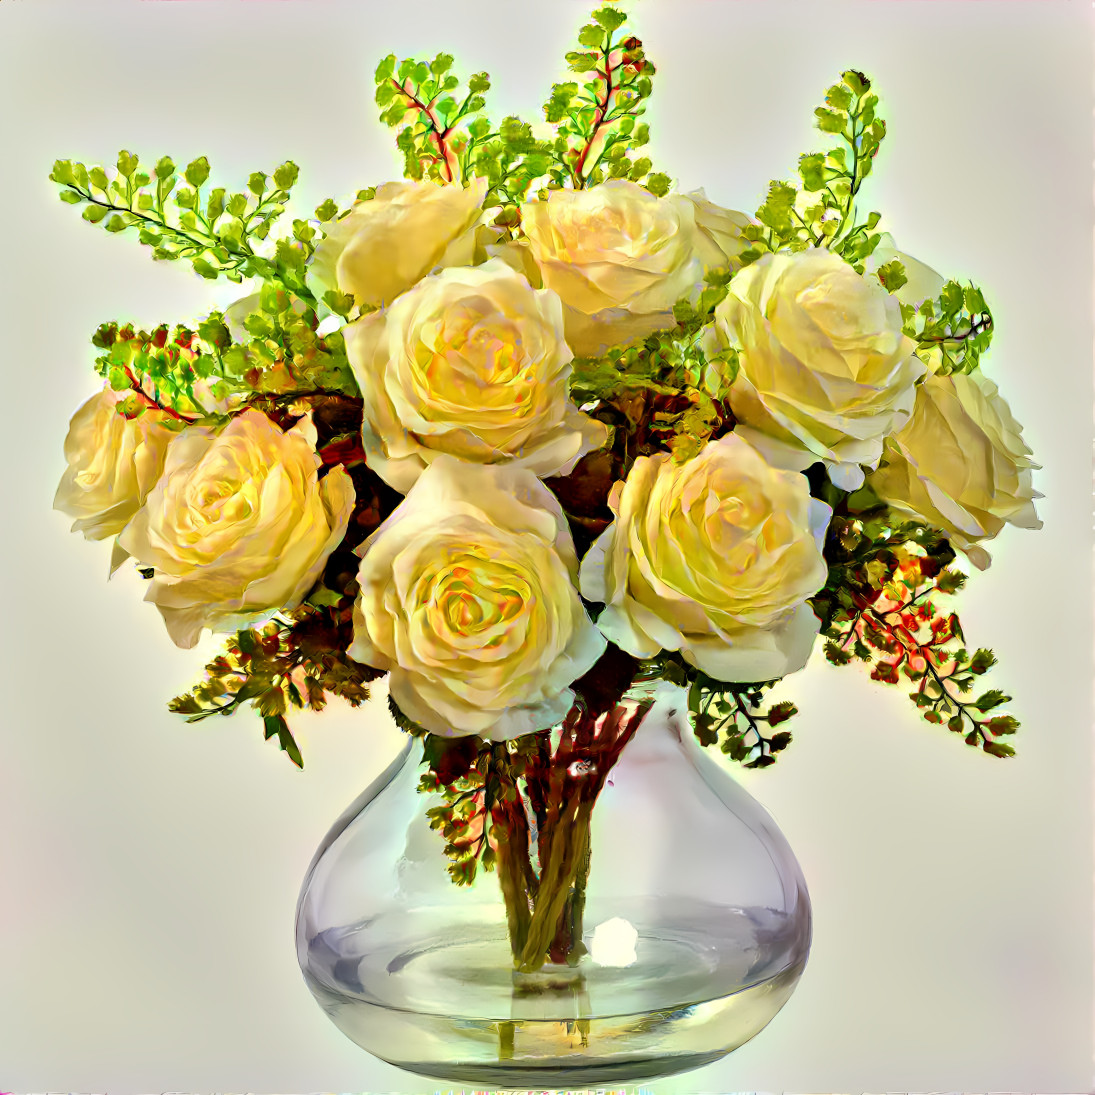 Roses in a glass vase.